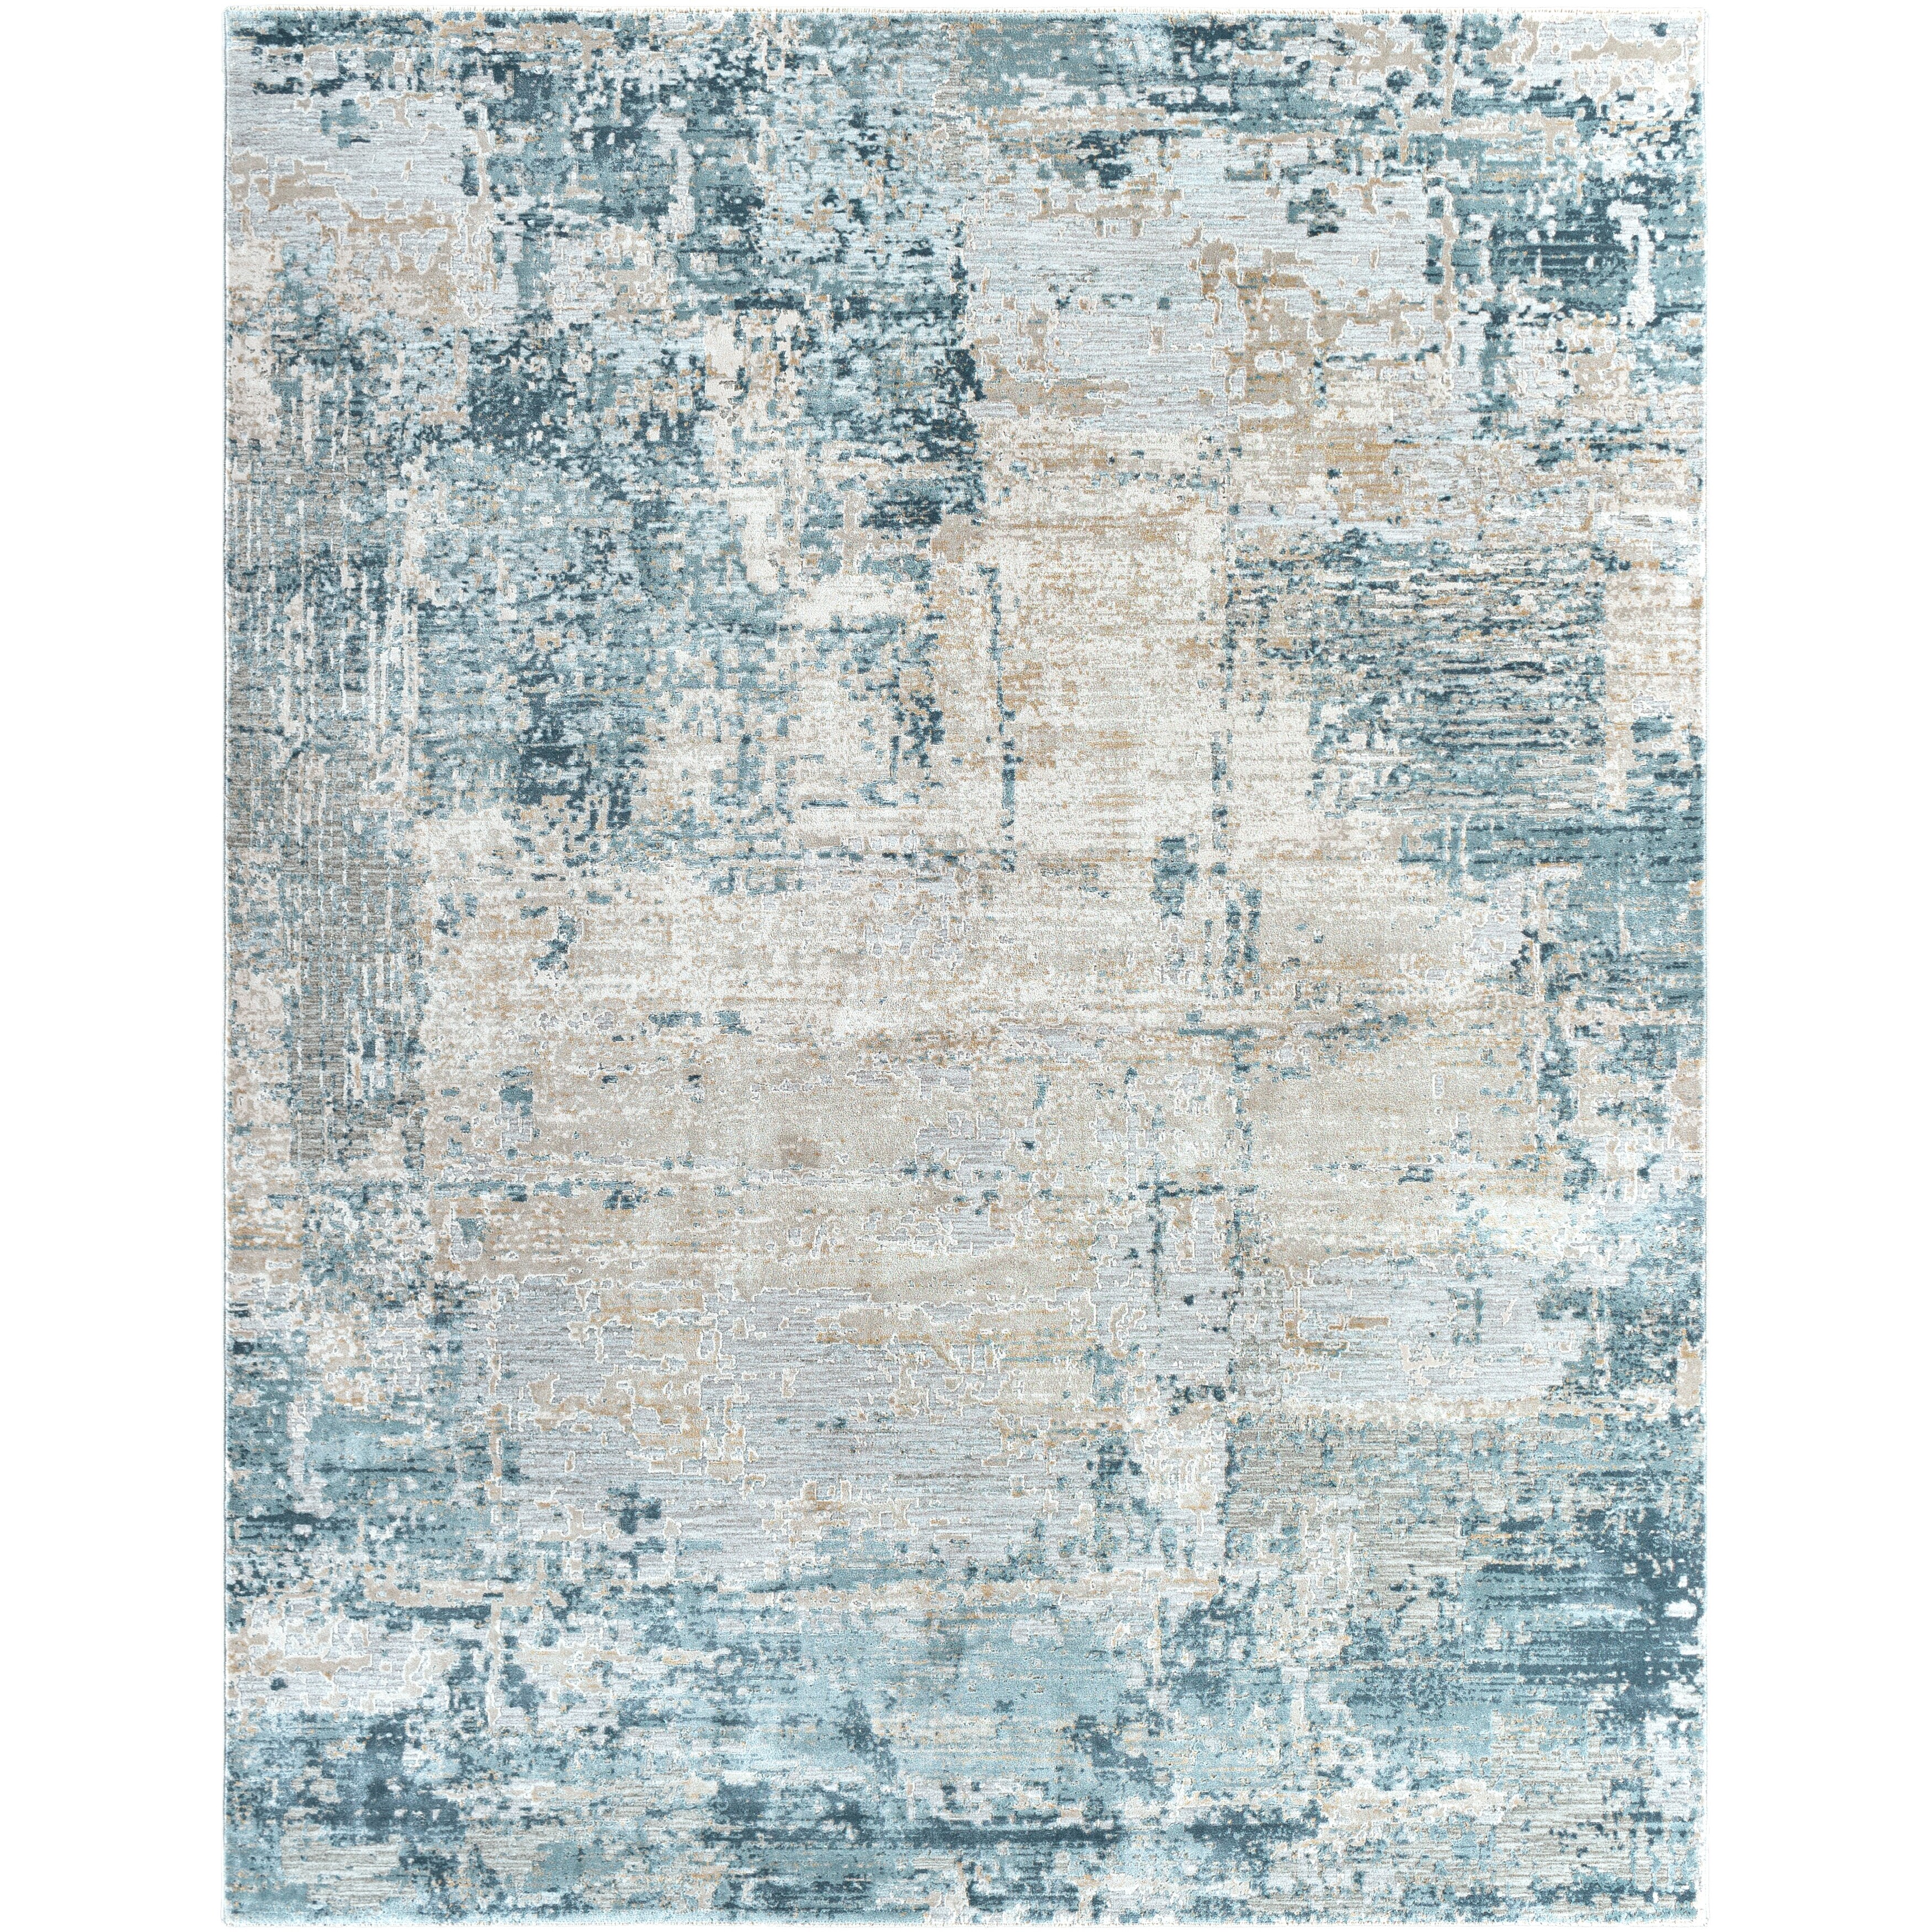 https://ak1.ostkcdn.com/images/products/is/images/direct/a3ac108cd1508cf1c509ca82457230fe40d4c85b/Seille-Modern-Area-Rug.jpg